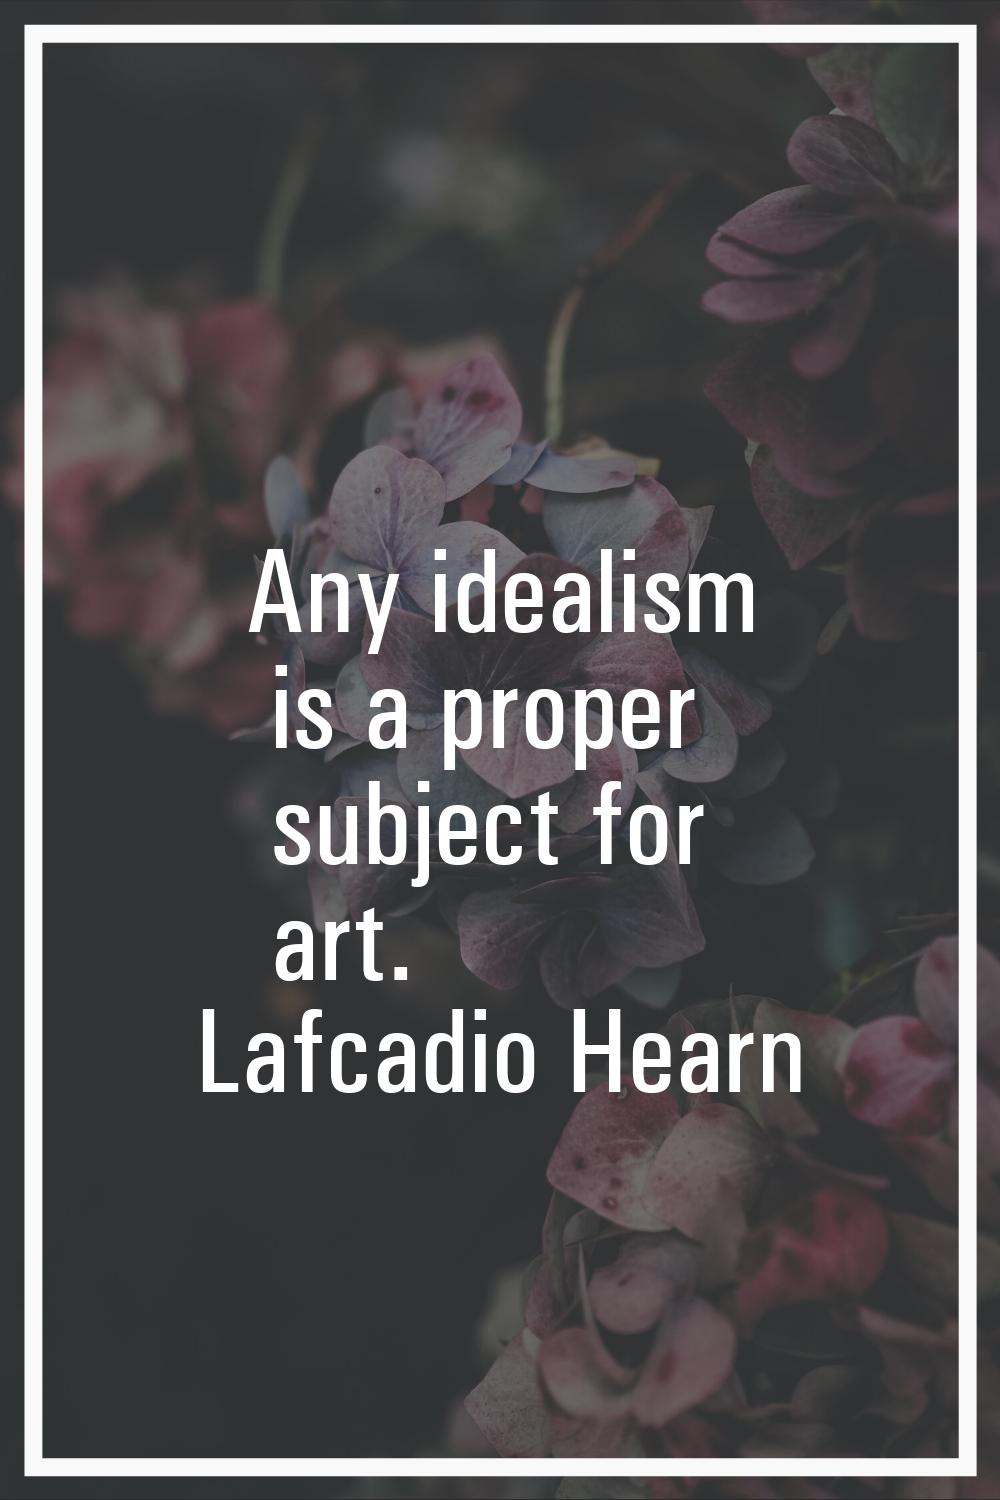 Any idealism is a proper subject for art.